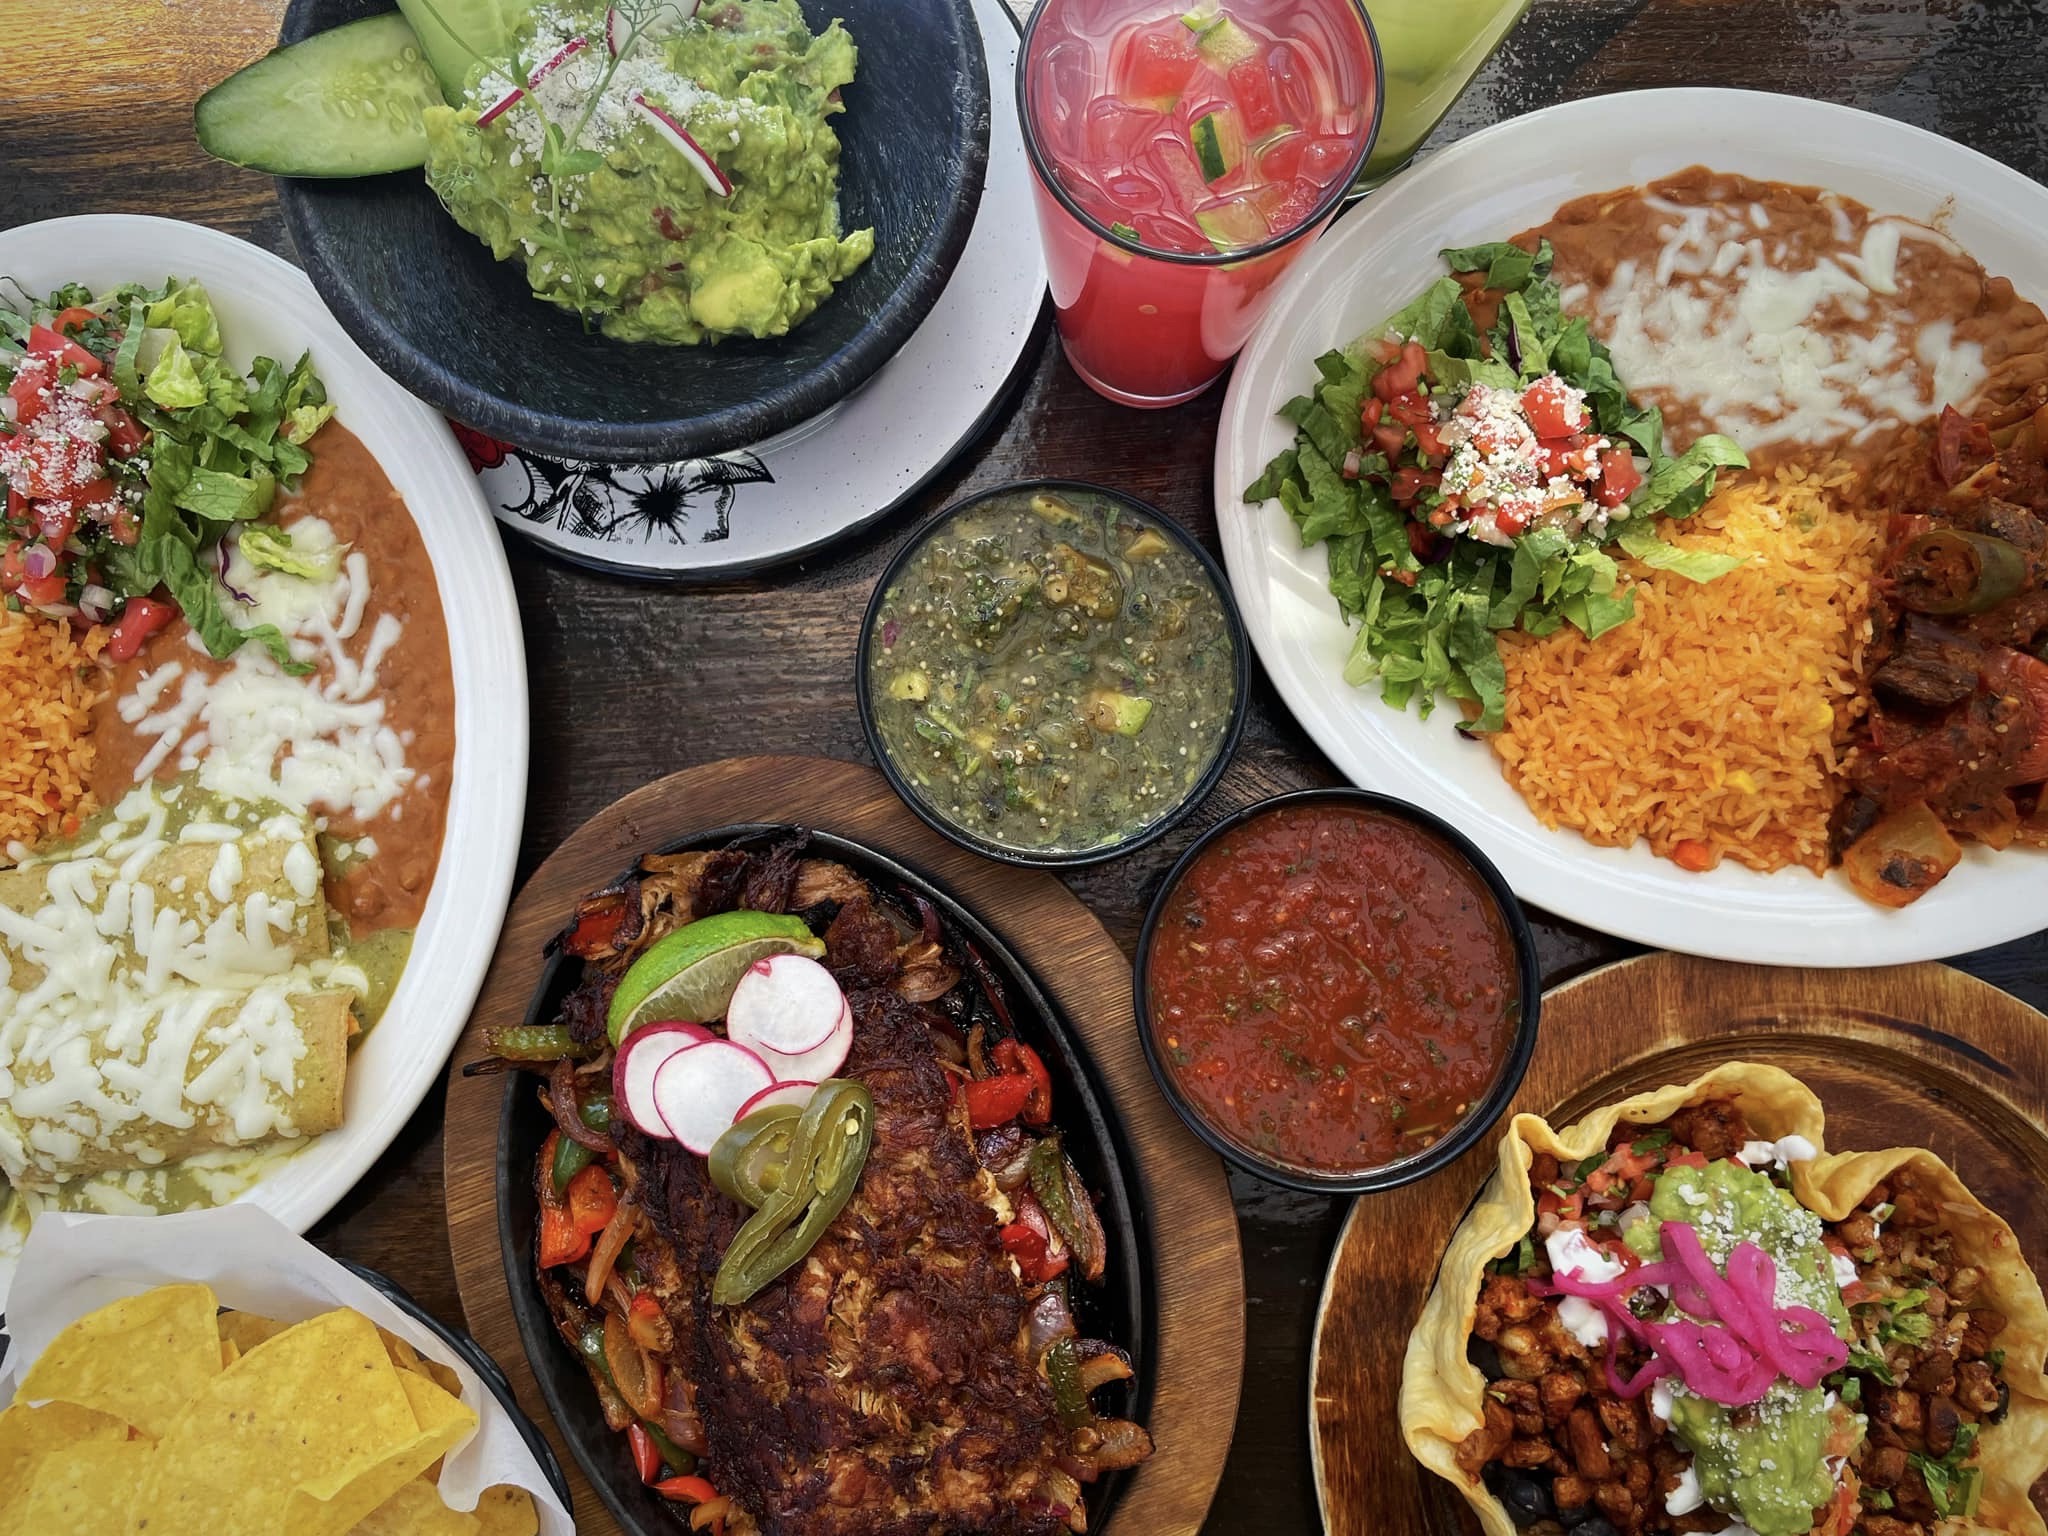 A spread of Mexican dishes like fajitas, enchiladas, and taco salads served with rice and beans and a pink margarita from Patria Cocina in Atlanta.